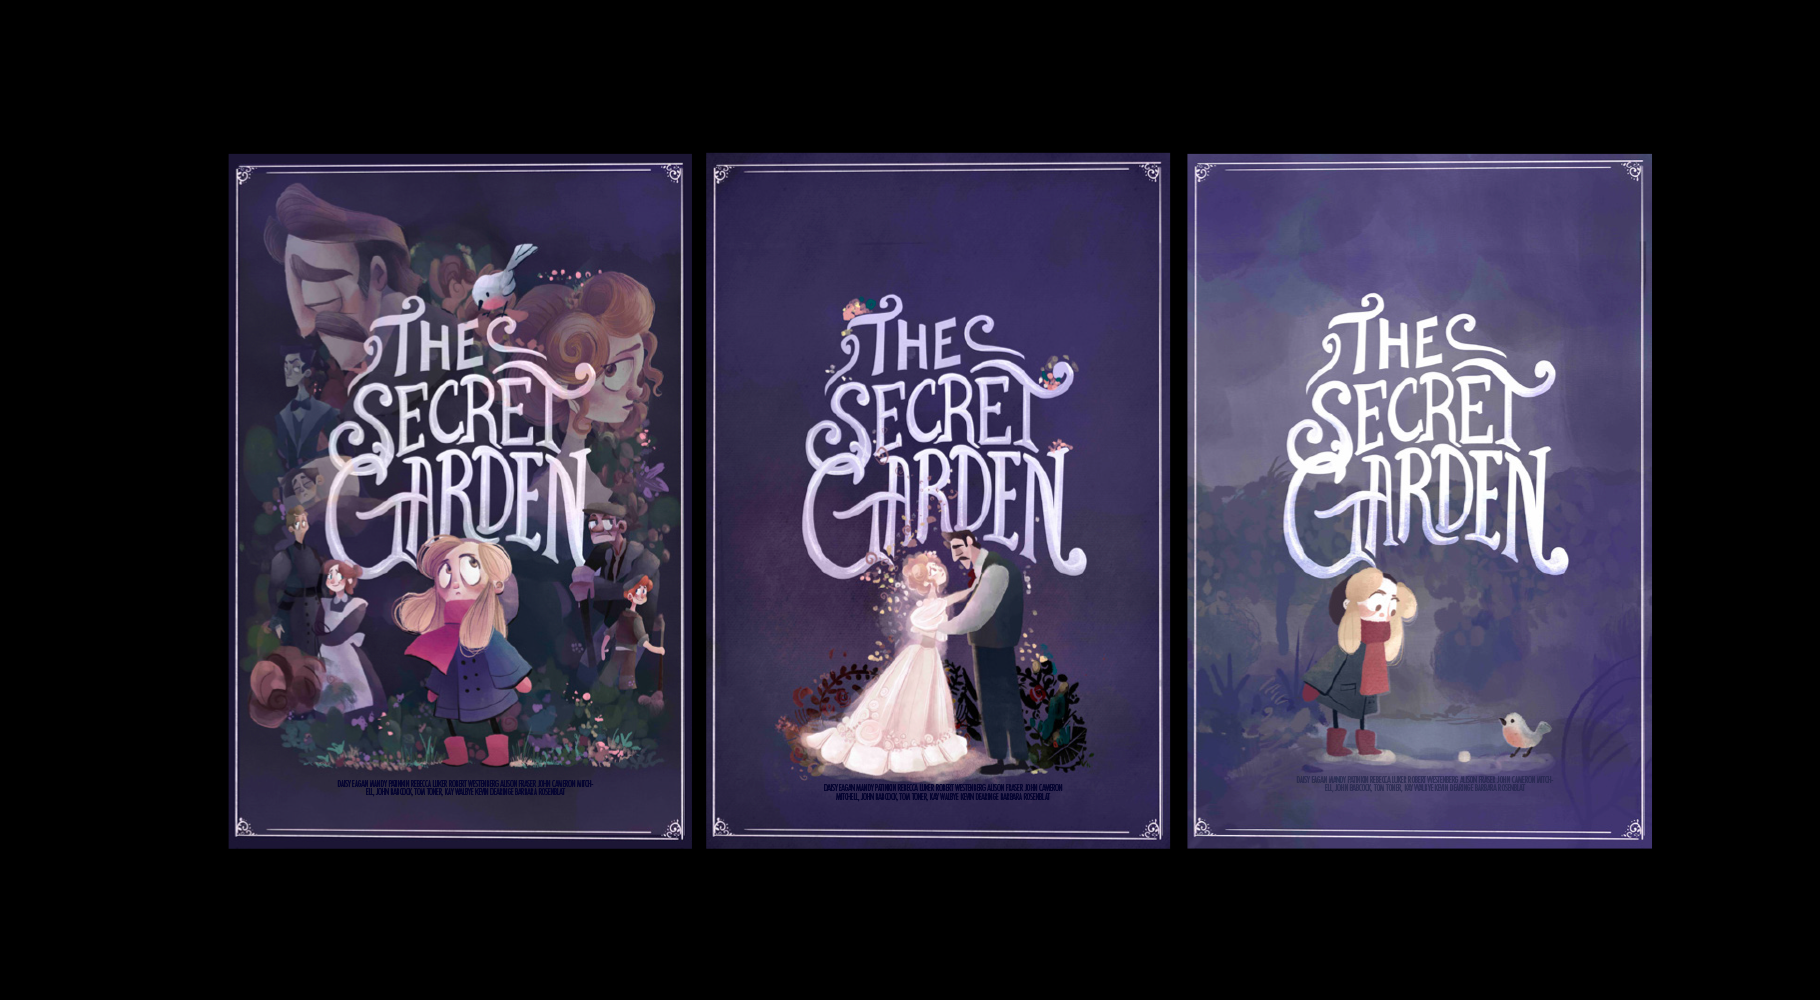 An image of three illustrated posters for an animated version of The Secret Garden.